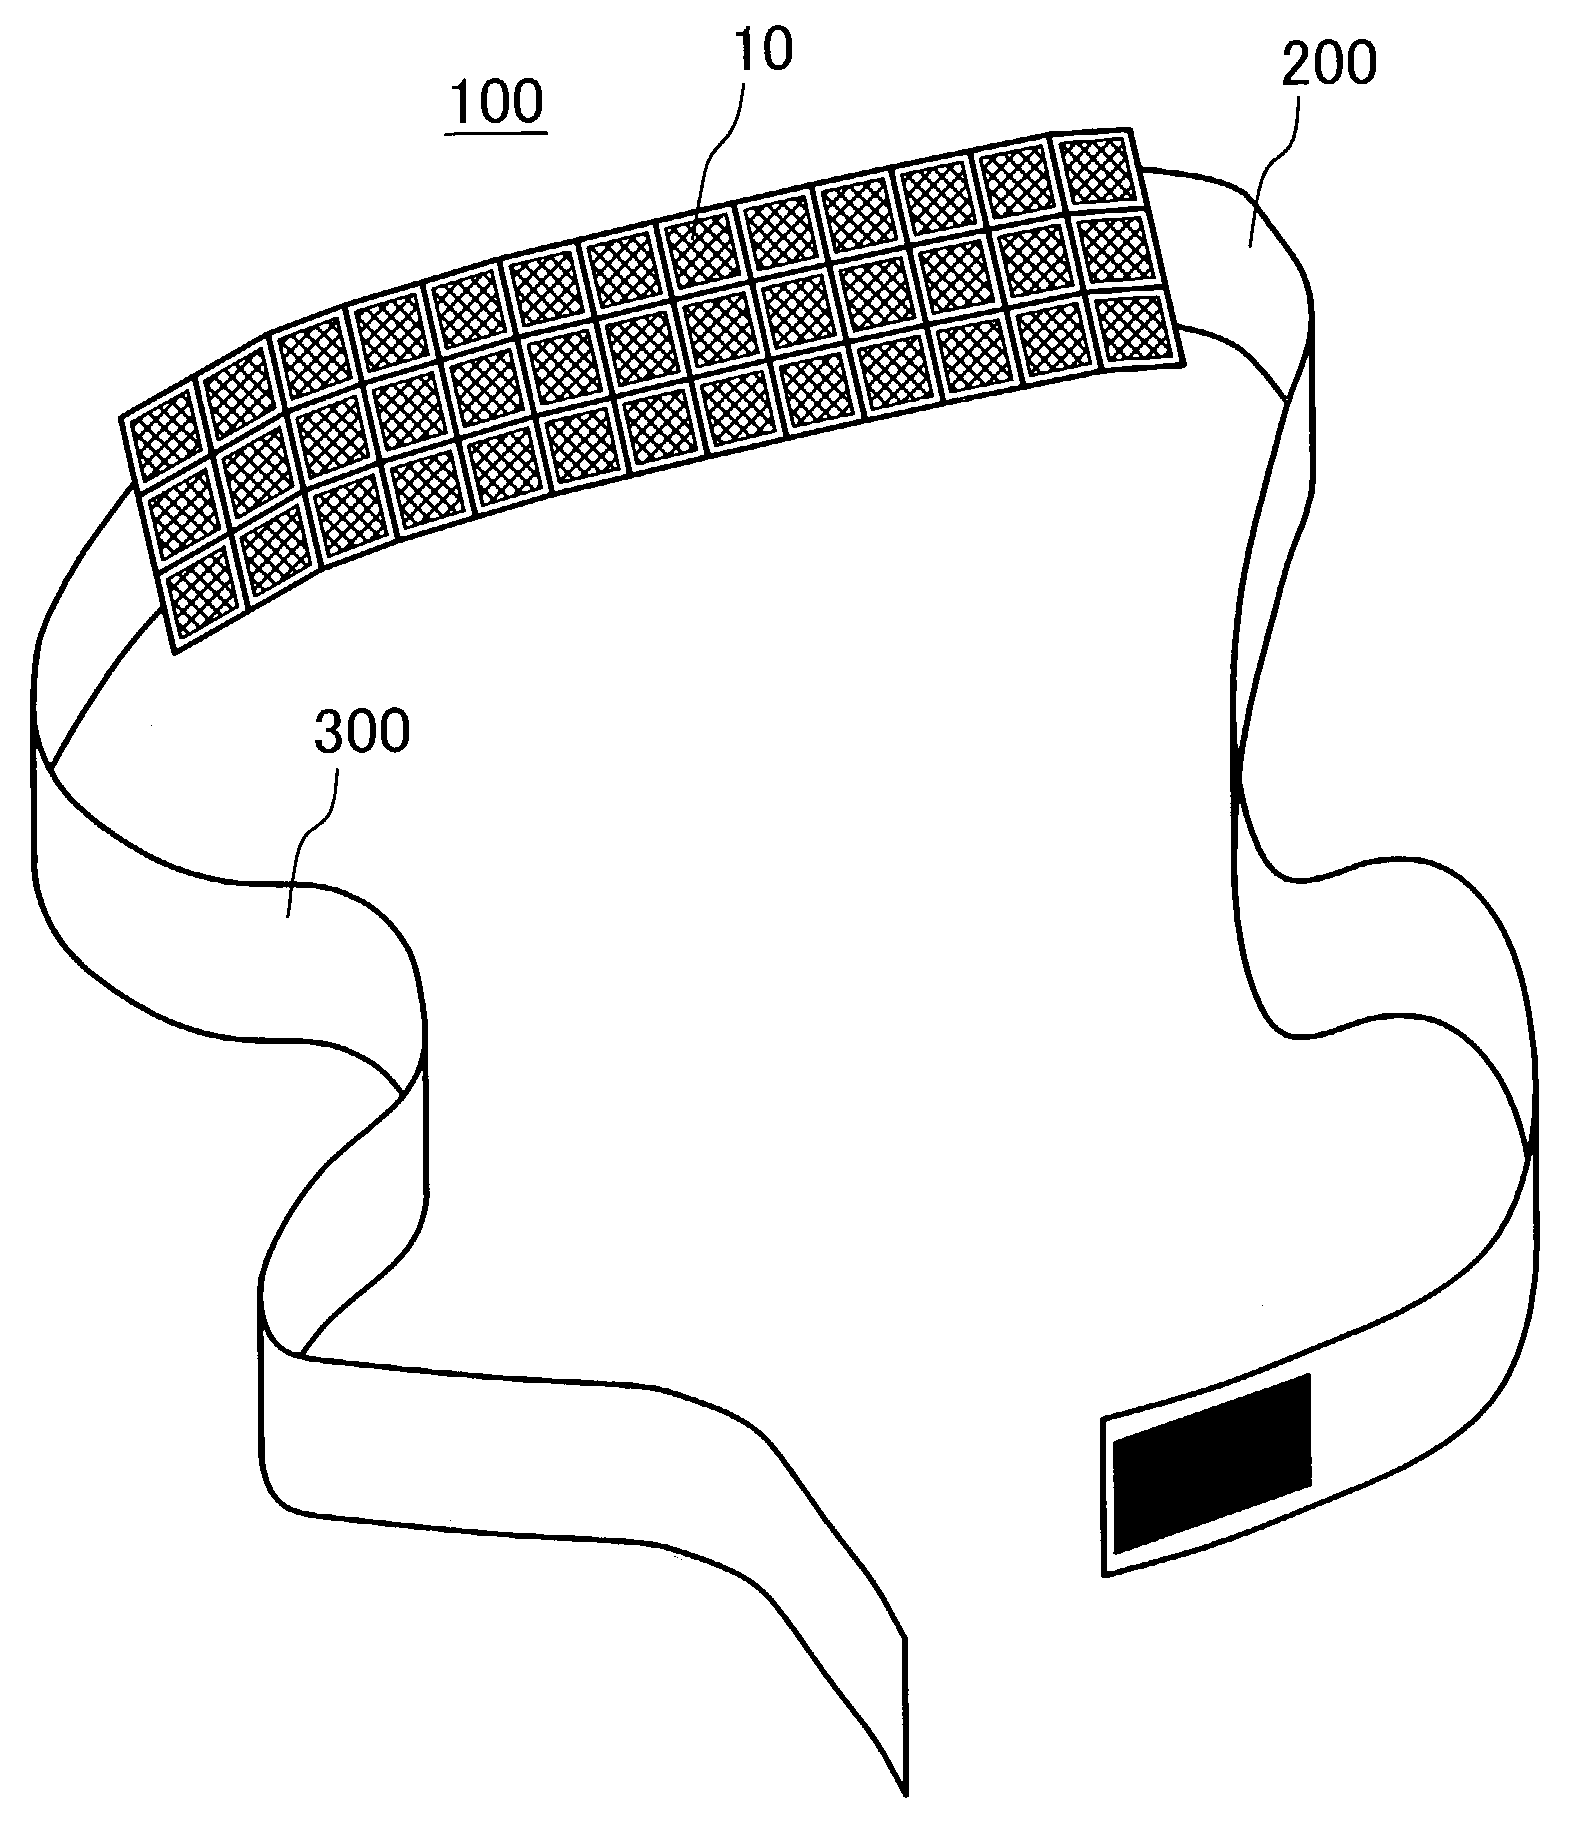 Ultrasonic apparatus for therapeutical use